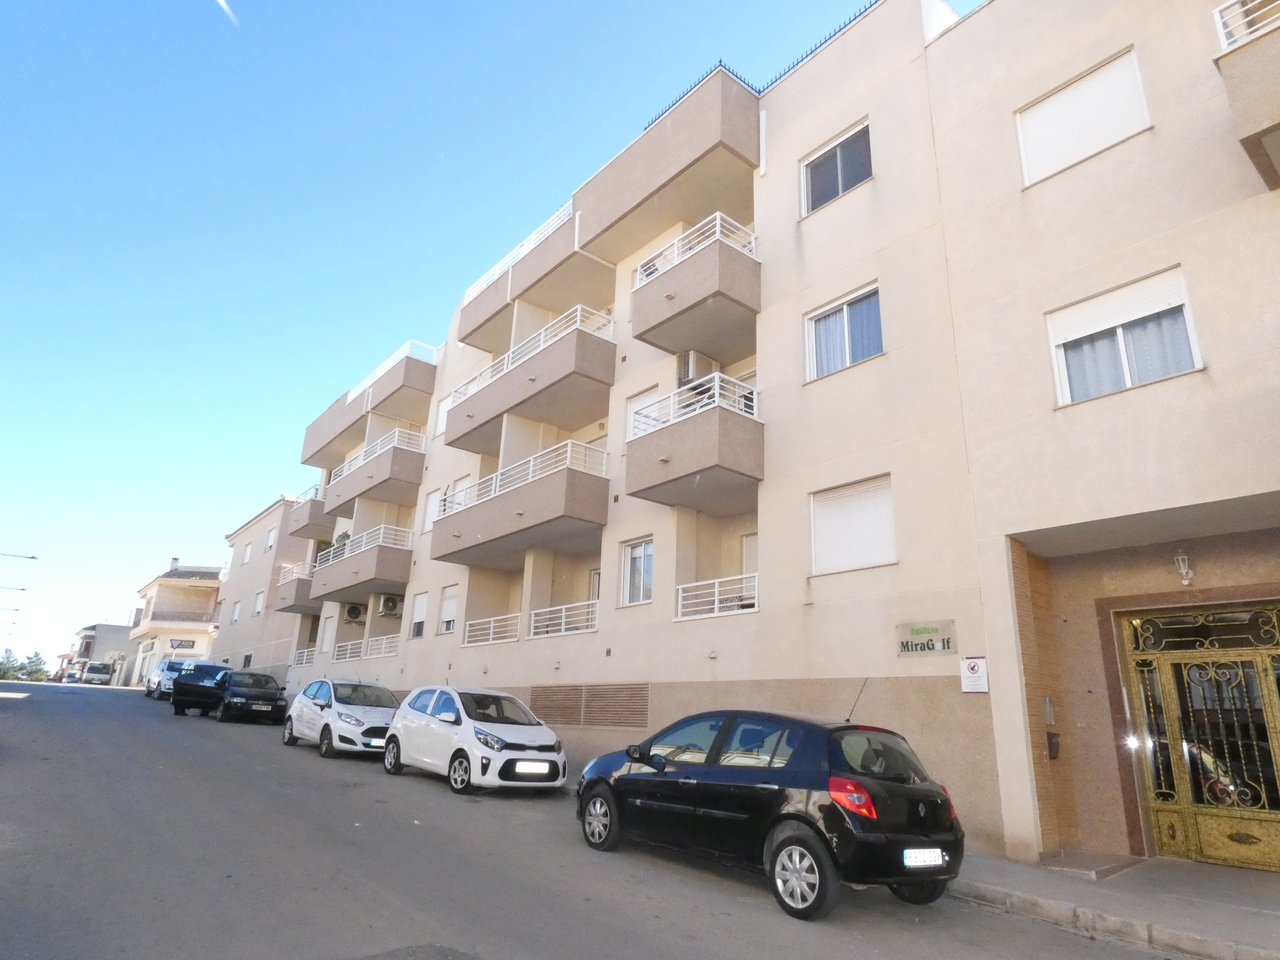 For Sale: Apartment in Algorfa Beds: 2 Baths: 1 Price: 74,995€